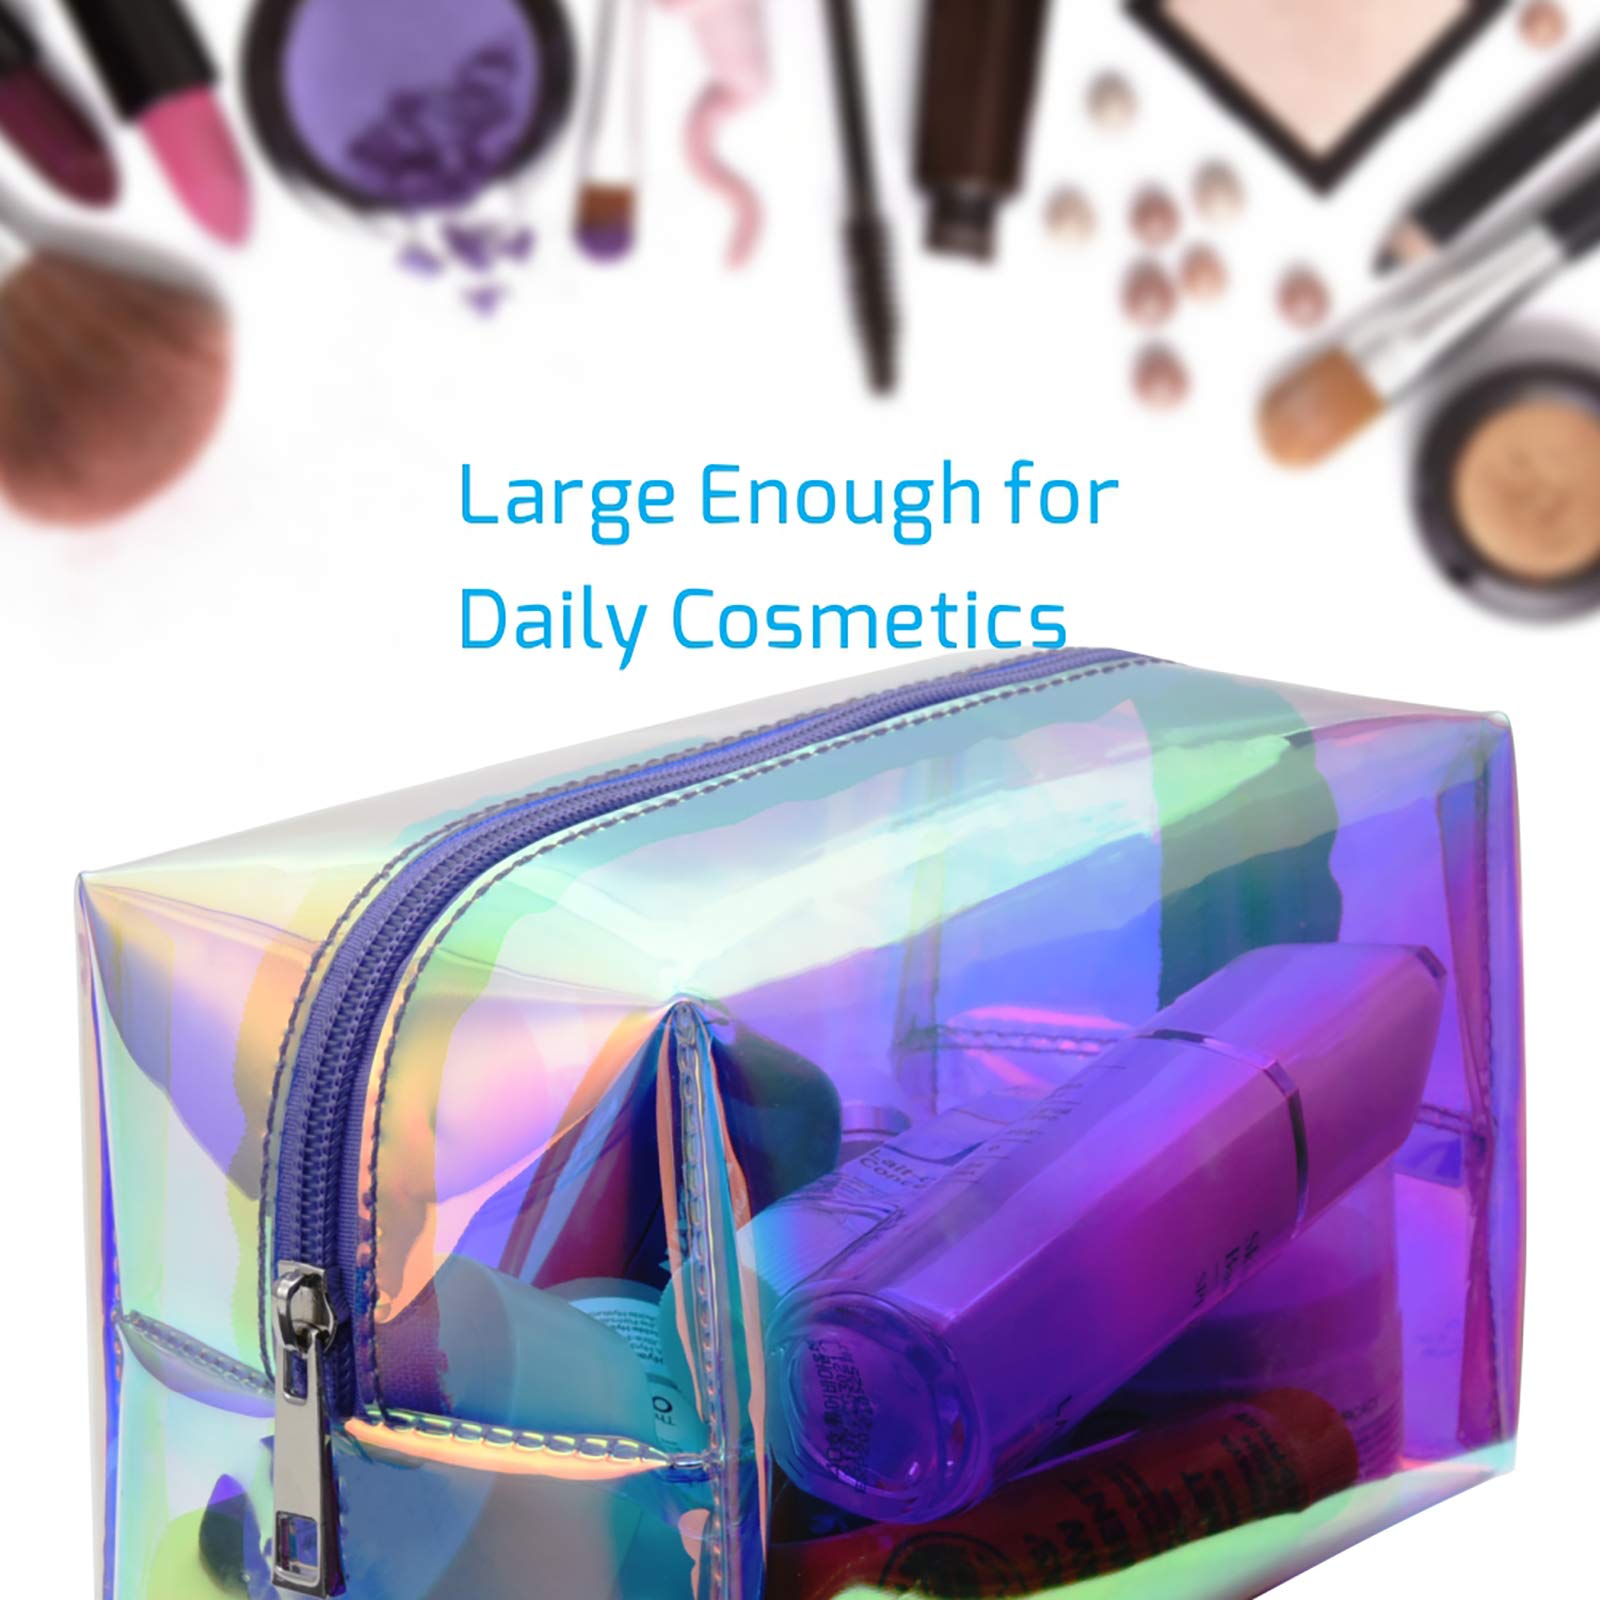 Cambond Holographic Makeup Bag, Clear Cosmetic Bag Large Iridescent Makeup Pouch Toiletry Organizer Cute Pencil Case Stationery Box, Gifts for College Girls Teens Women (Holographic Purple)